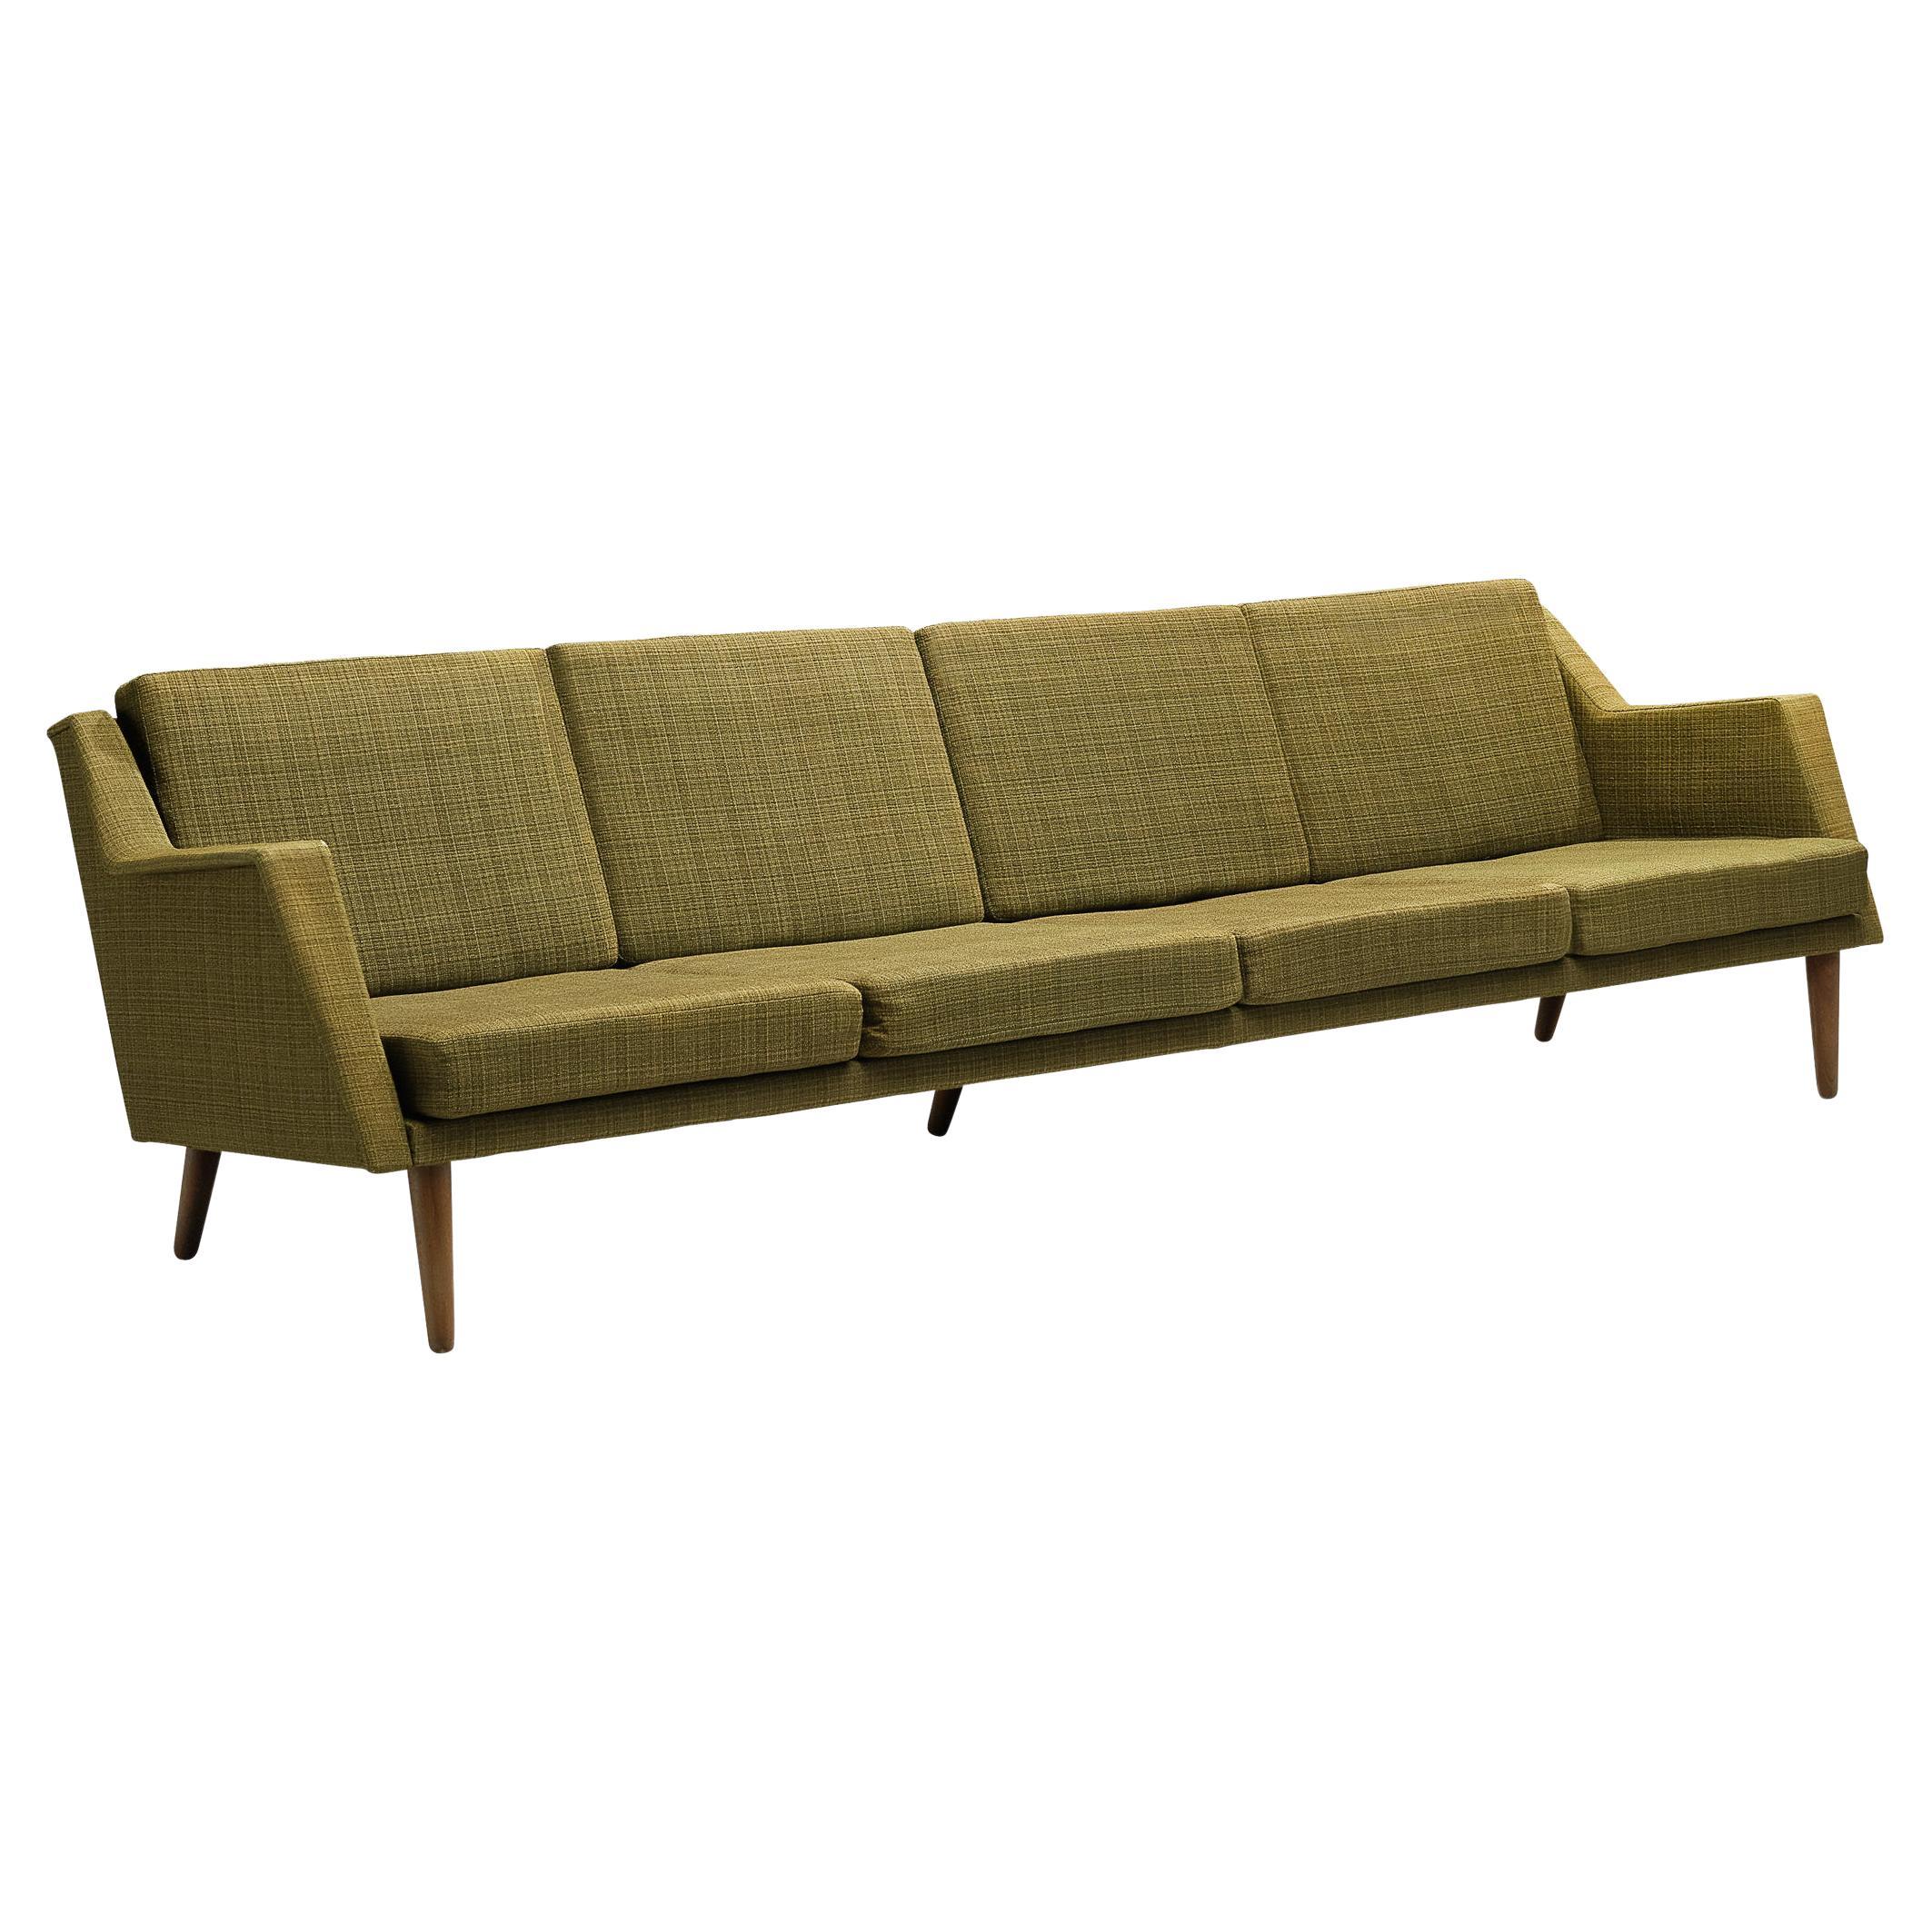 Danish Four Seat Sofa in Teak and Moss Green Upholstery For Sale at ...